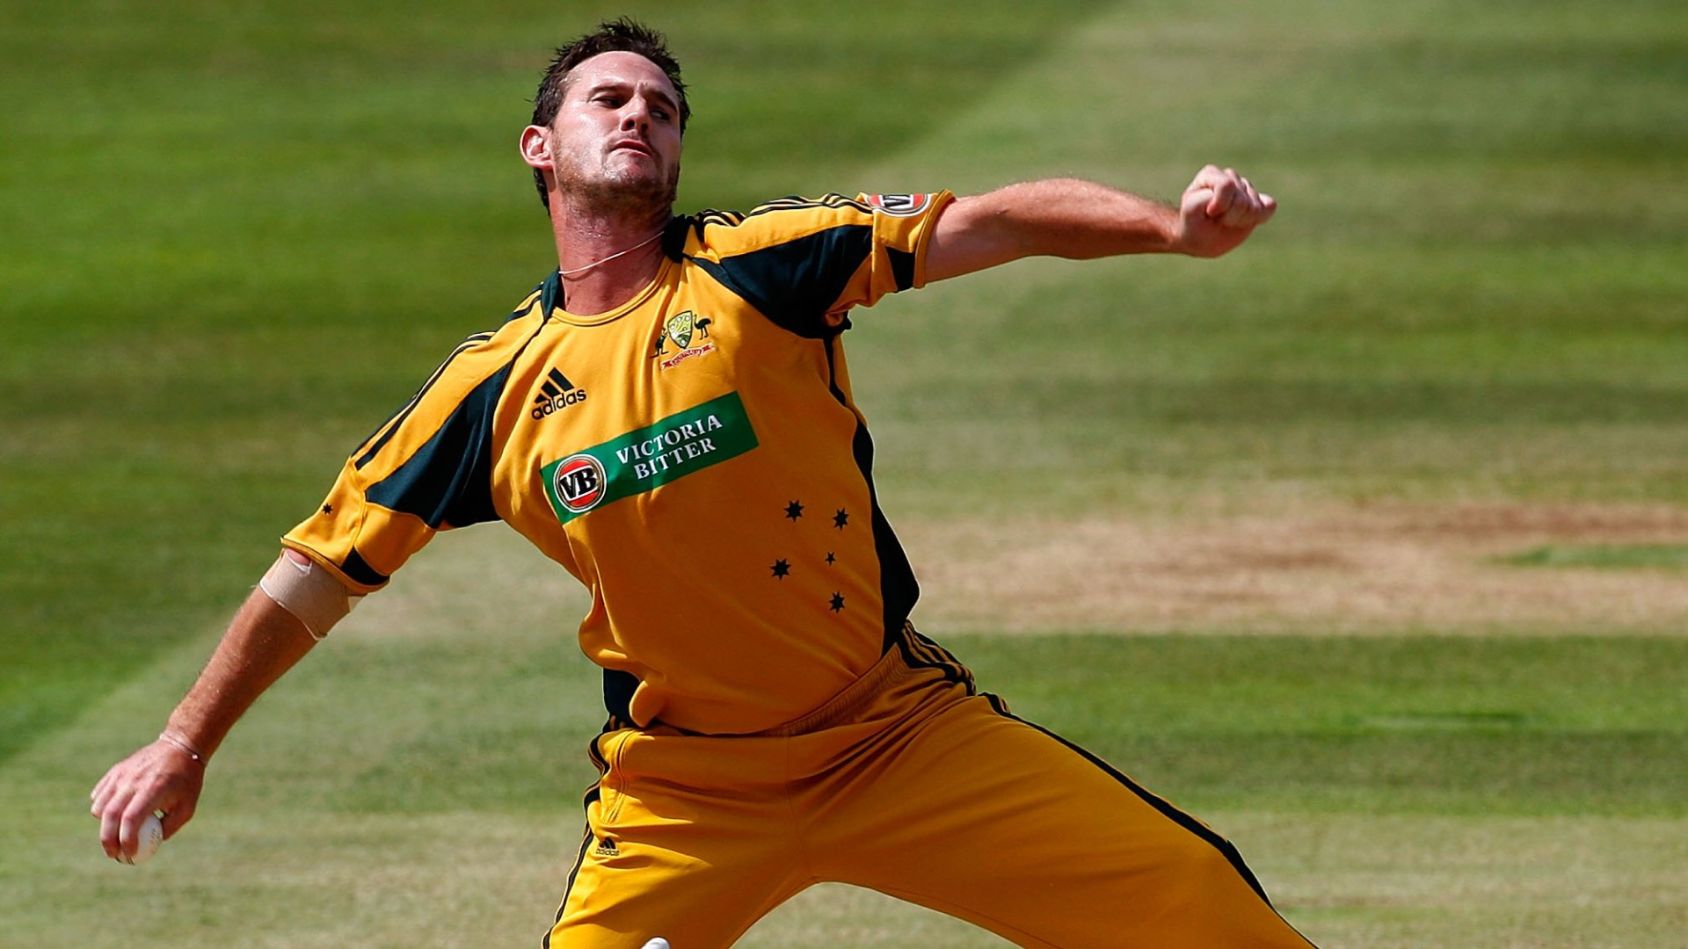 Shaun Tait appointed Afghanistan bowling coach for T20 World Cup 